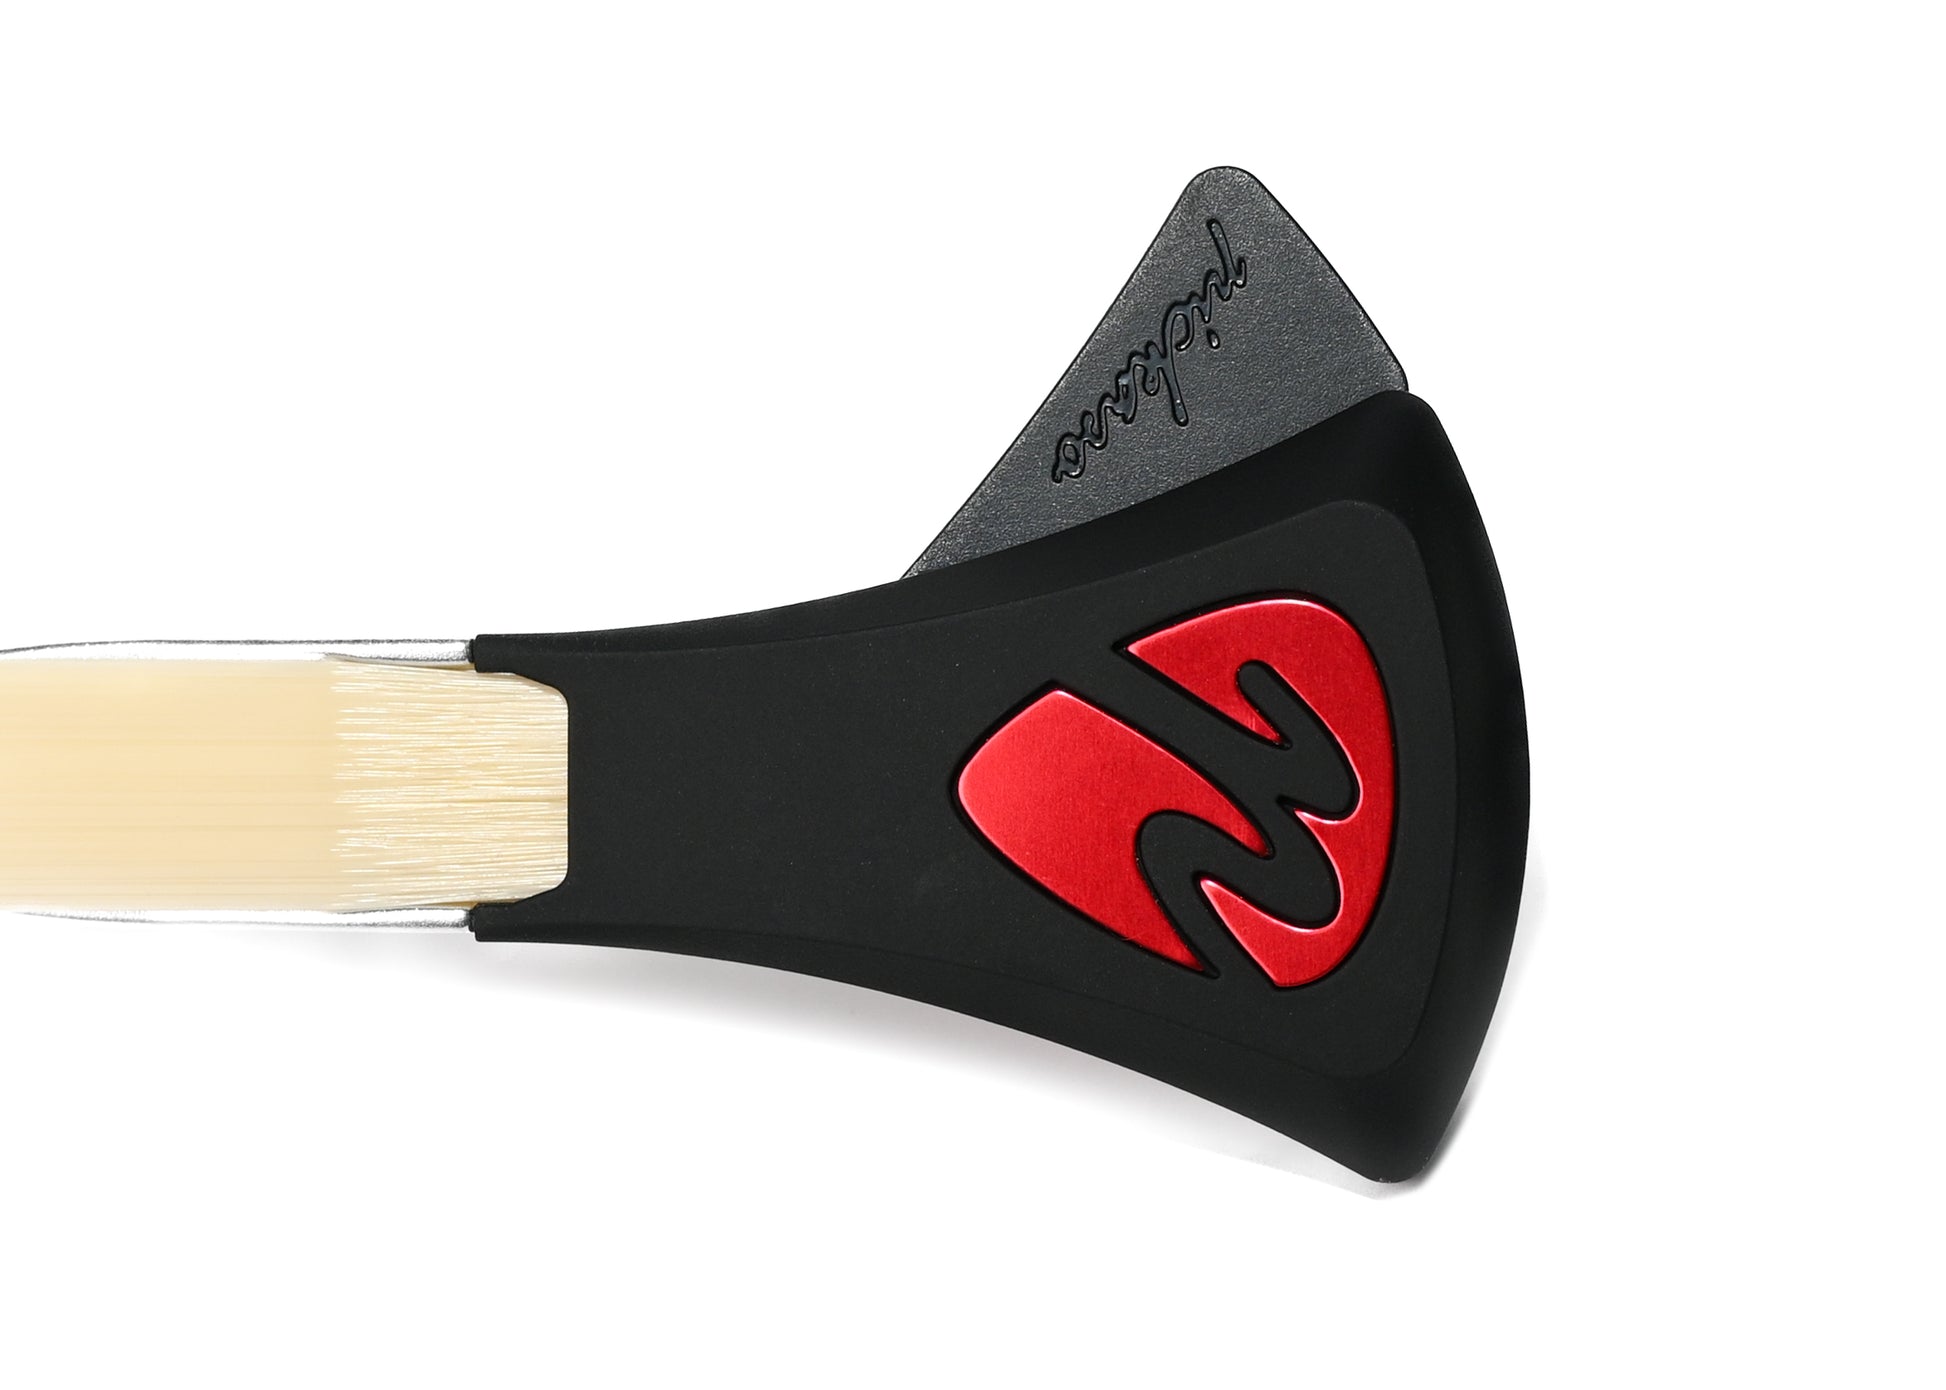 Pickaso Guitar Bow Matte black and Ruby Red